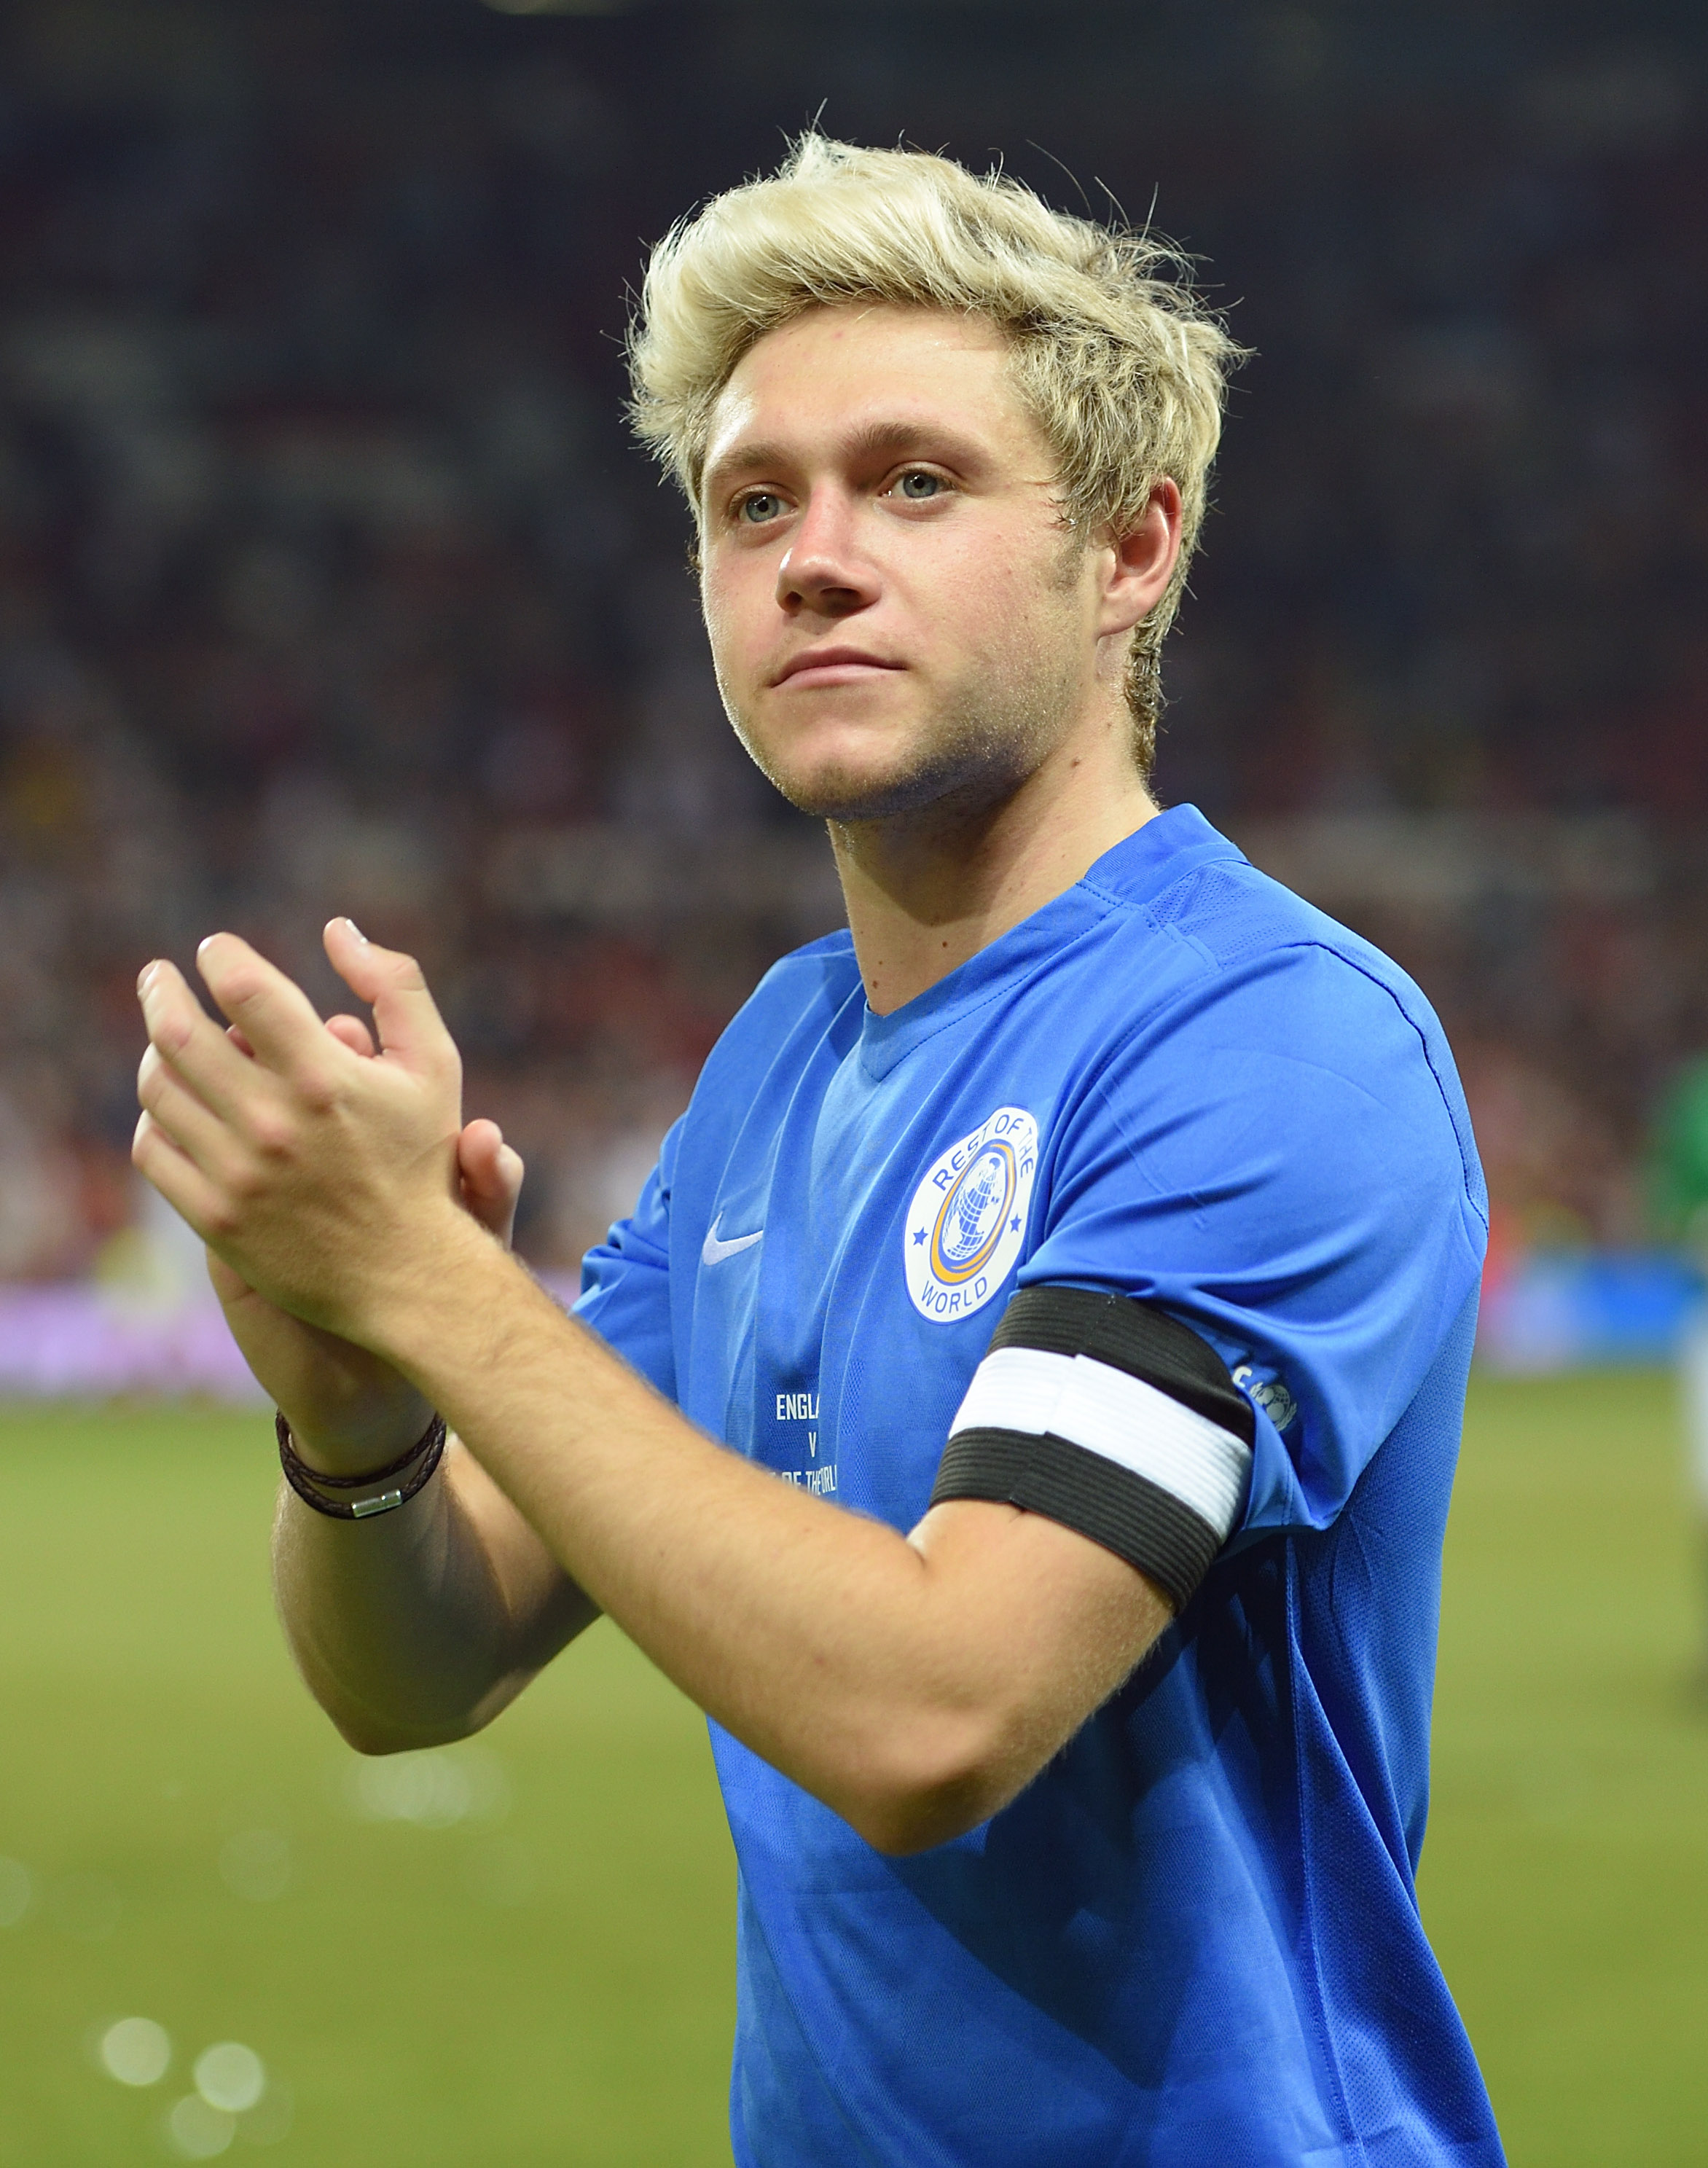 MANCHESTER, ENGLAND - JUNE 05:  Niall Horan attends Soccer Aid 2016 at Old Trafford on June 5, 2016 in Manchester, United Kingdom.  (Photo by Karwai Tang/WireImage)